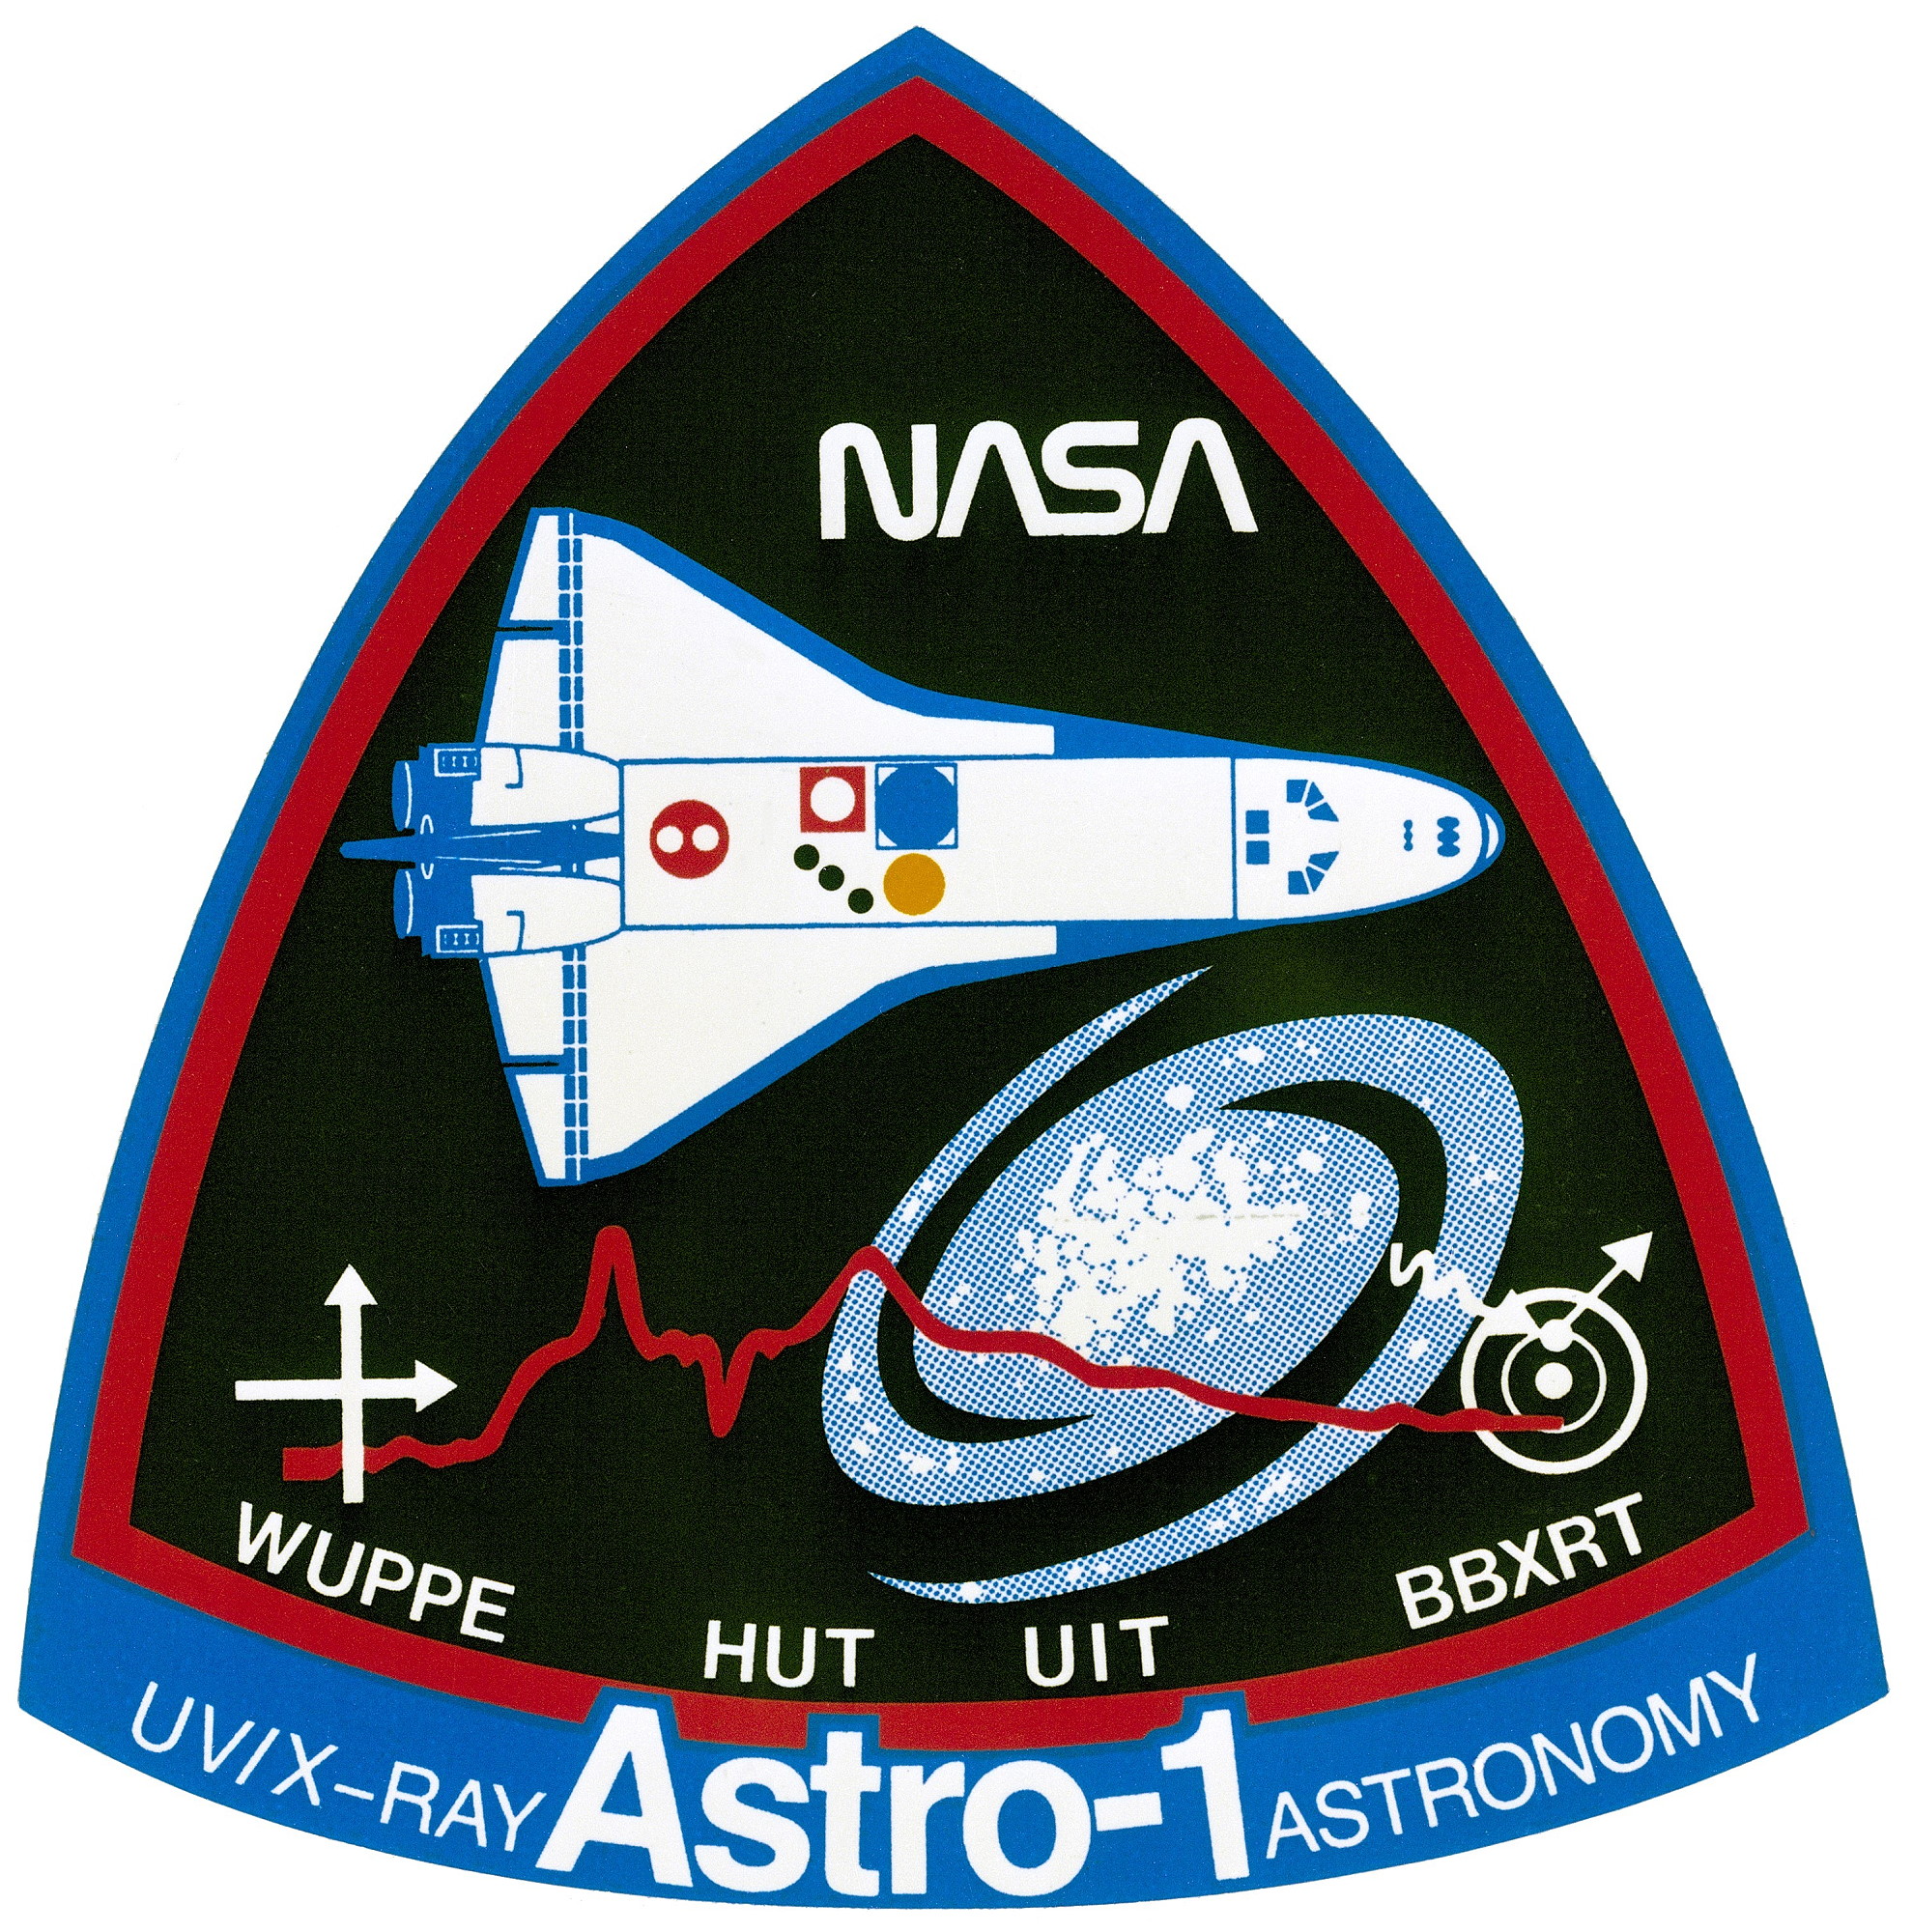 NASA STS-35 Mission Decal Space Program Shuttle Columbia Astro-1 